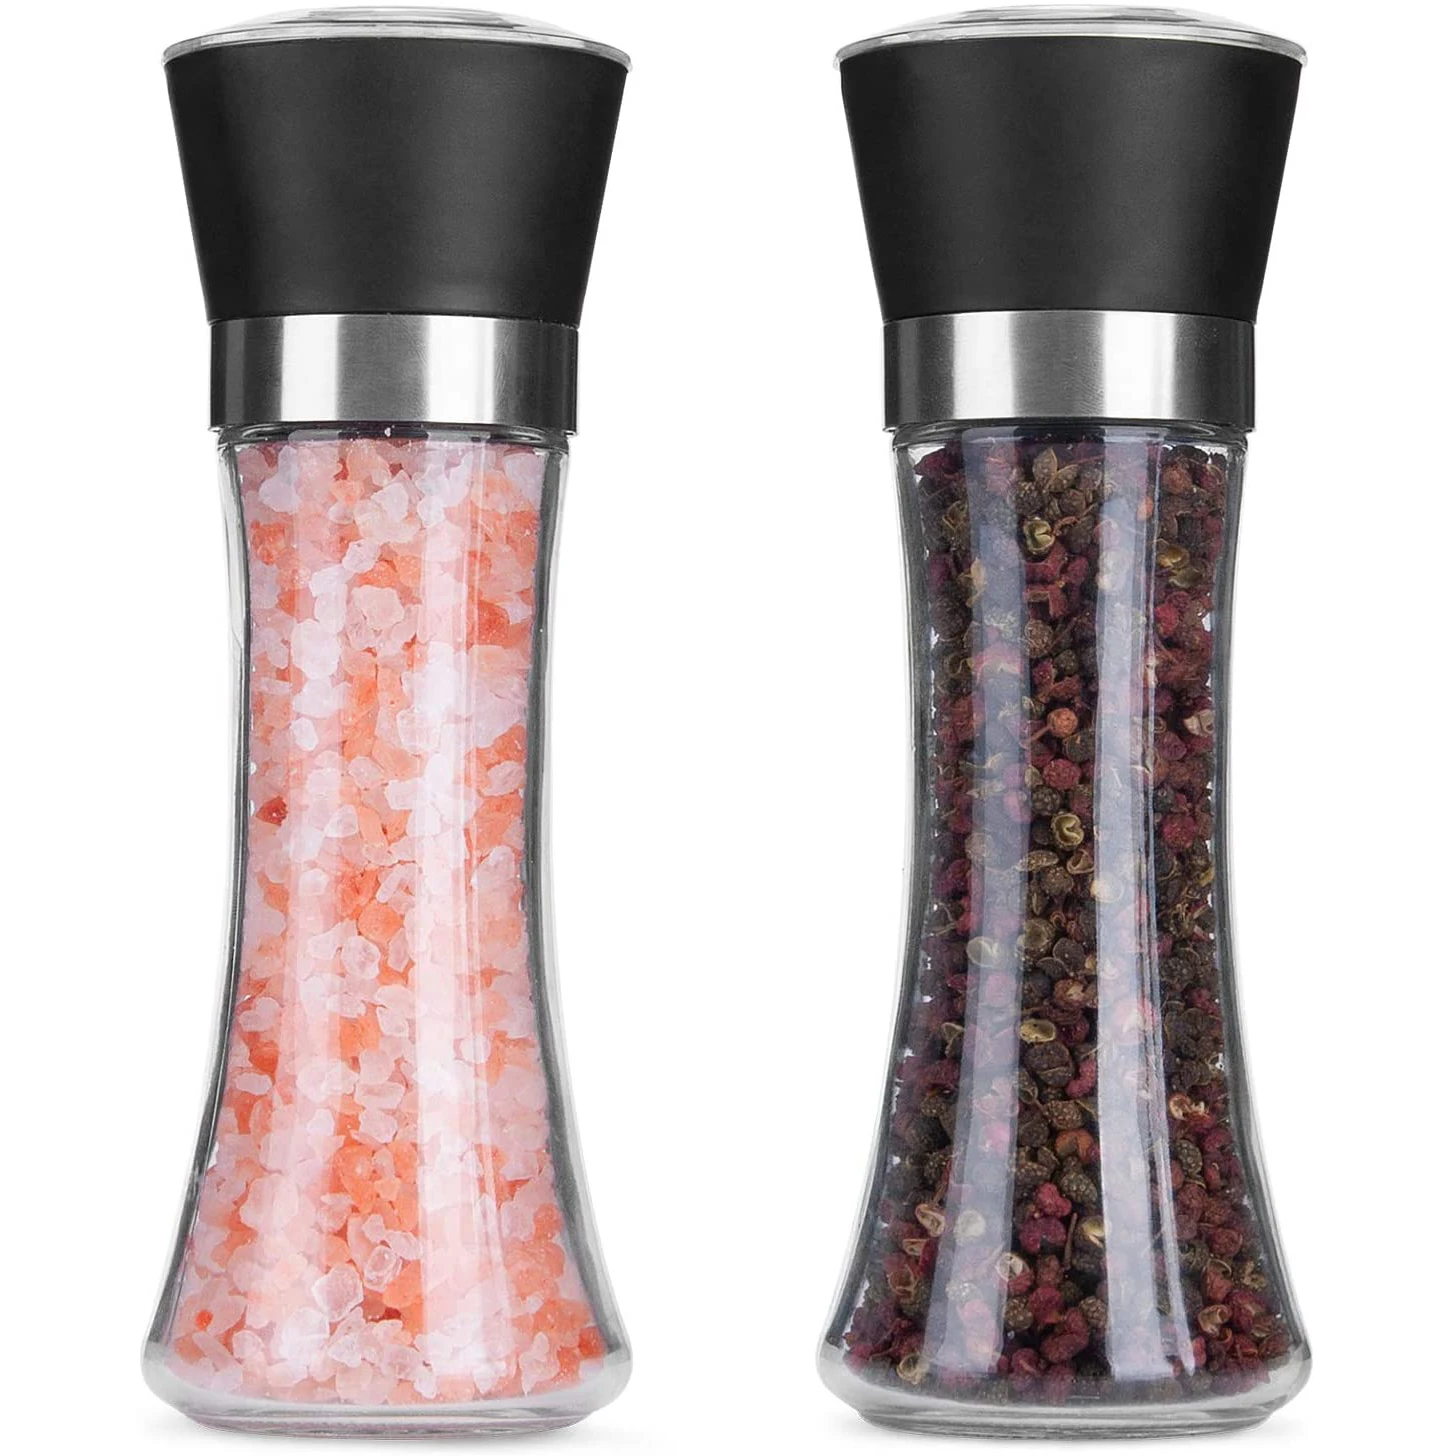 

Wholesale Hot Sell Adjustable Ceramic Core Bottle Stainless Steel Glass Salt Mill Chili Manual Pepper Grinder